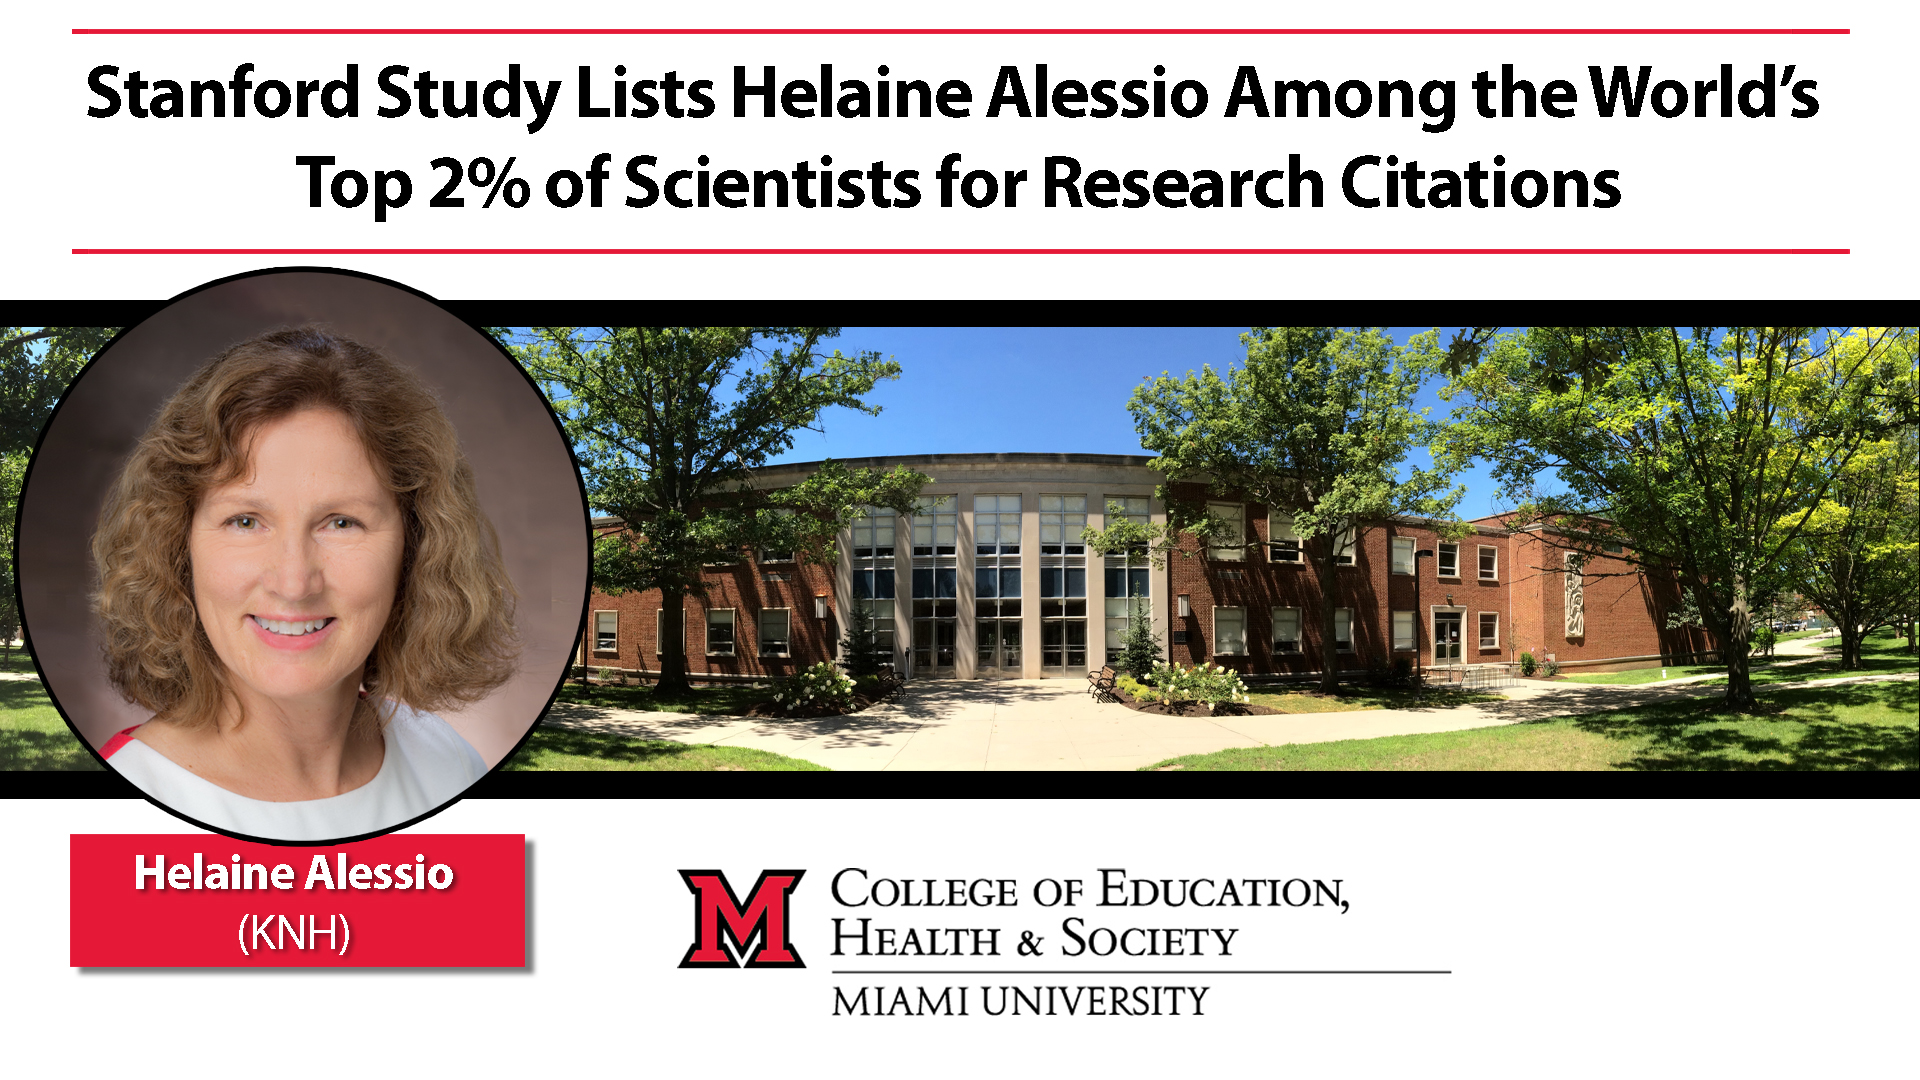 Stanford study lists Dr. Helaine Alessio among the world's top 2% of scientists for research citations